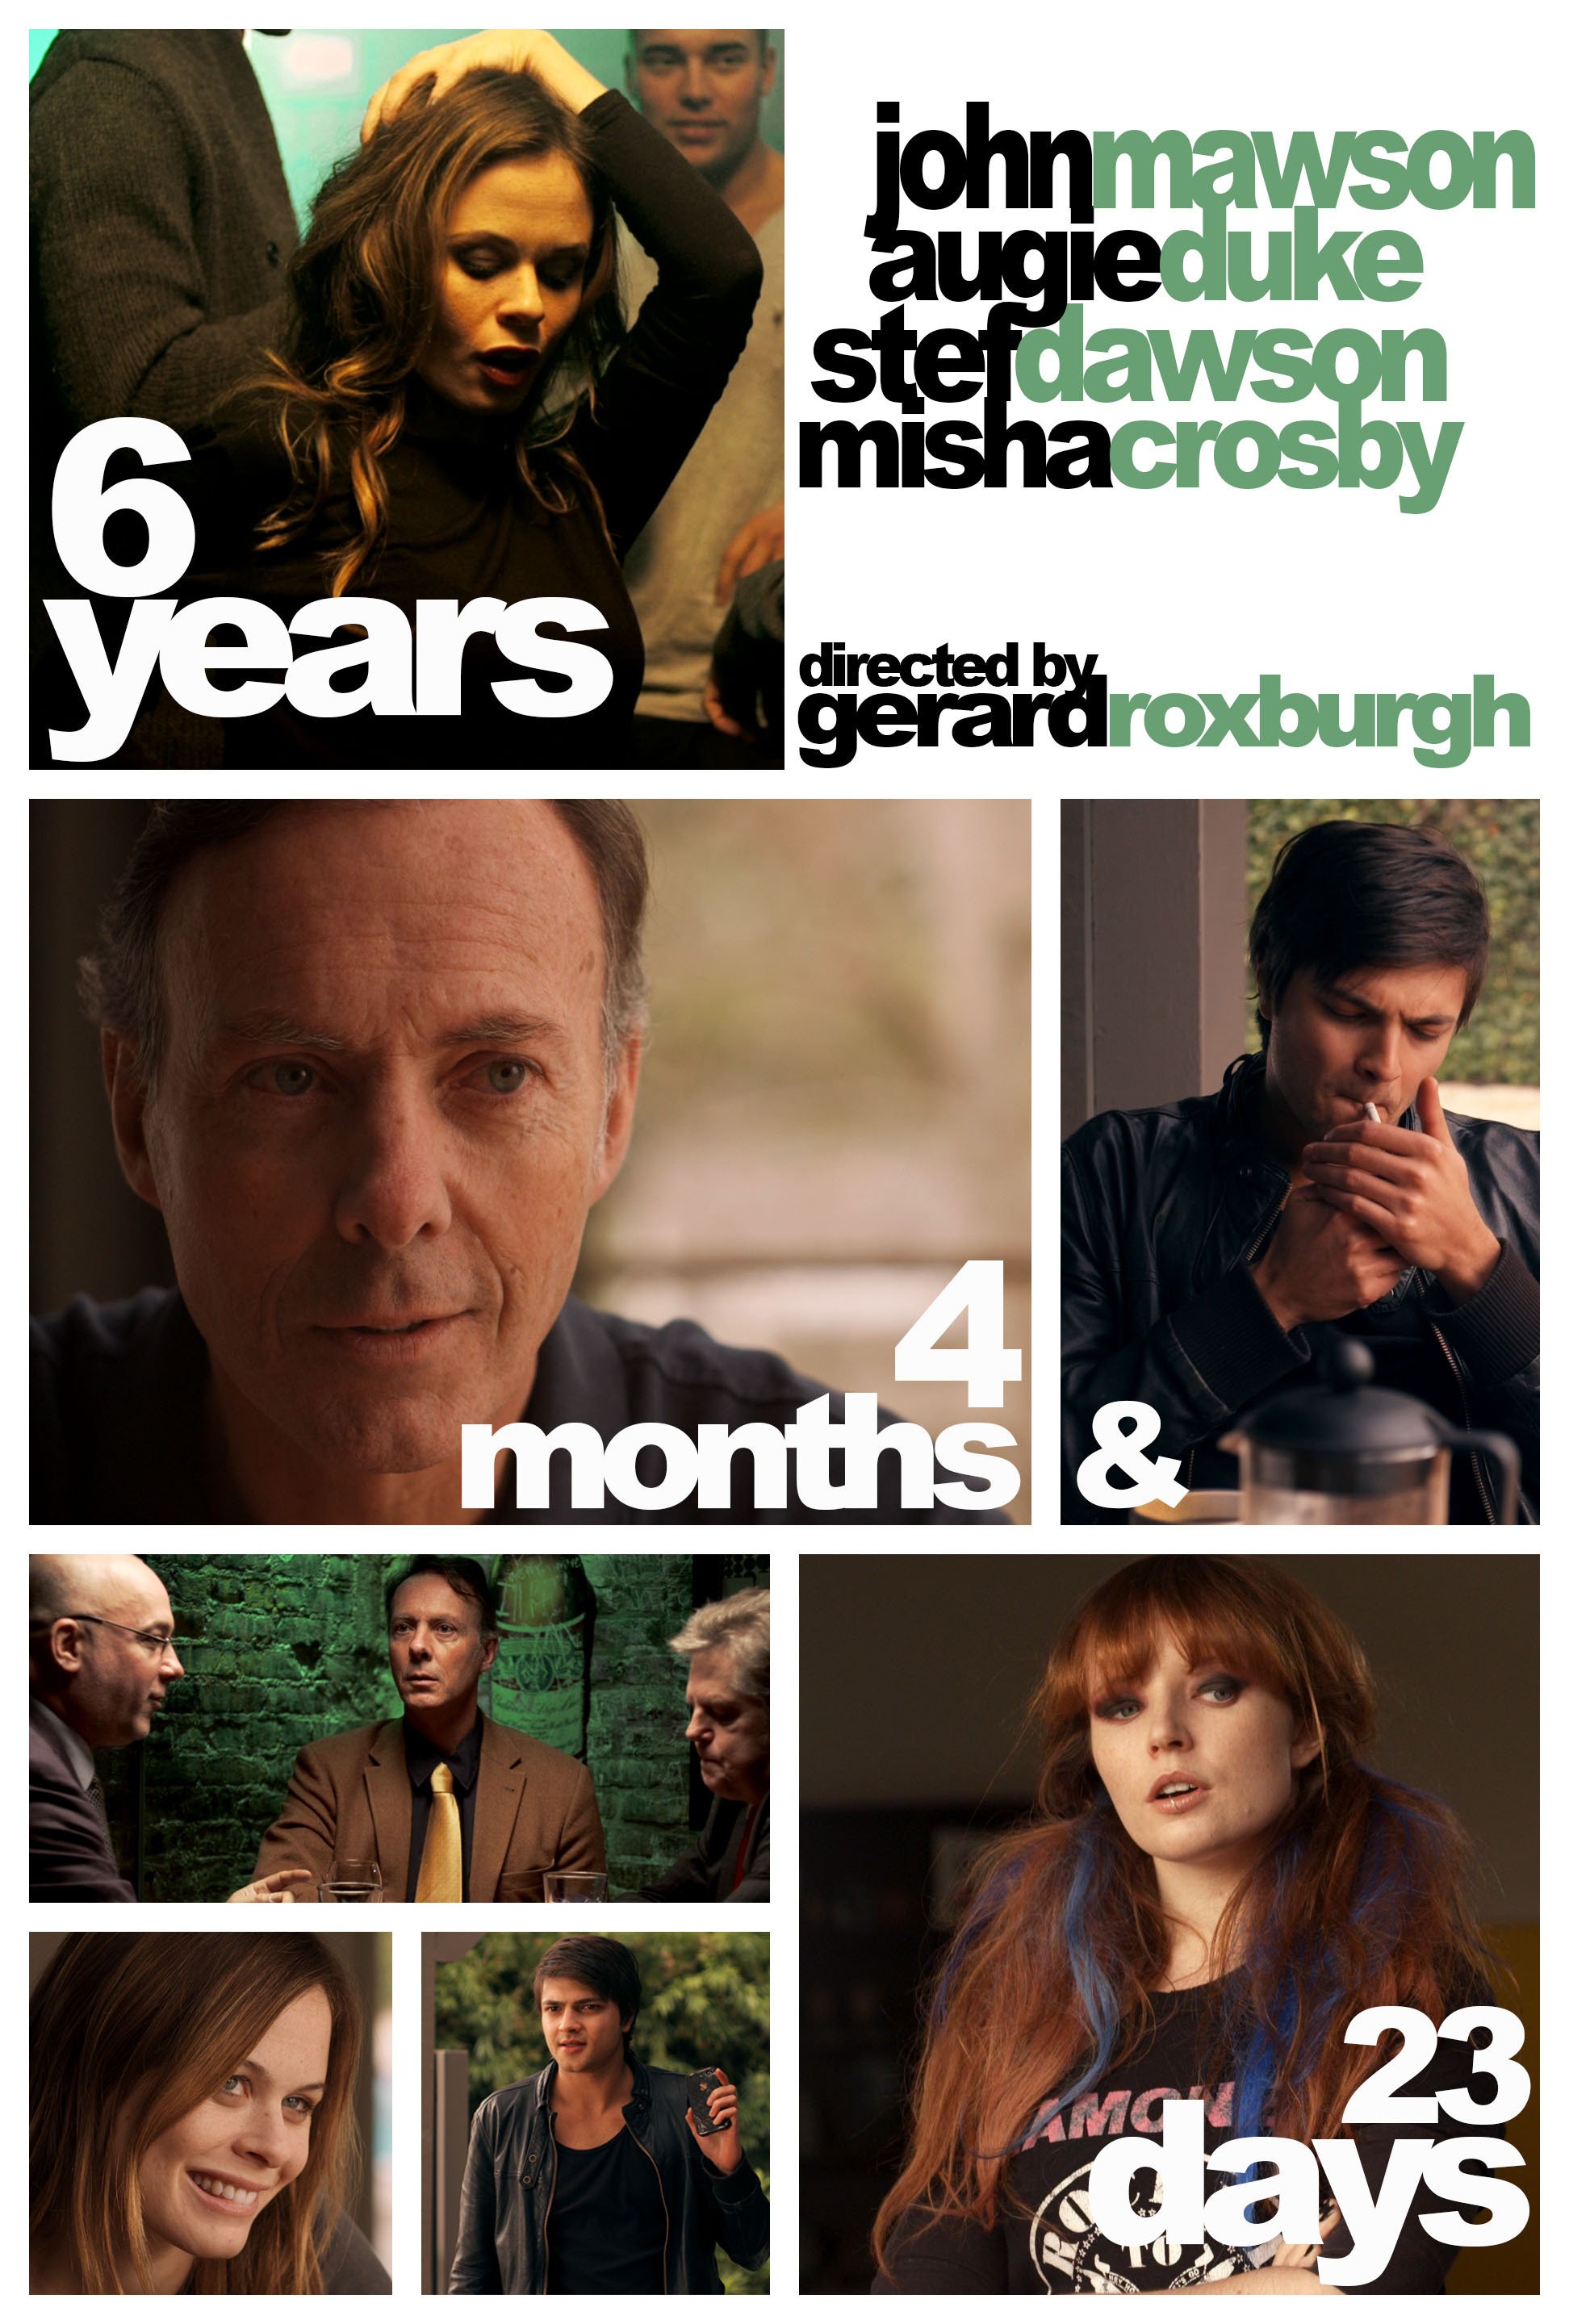 Mega Sized Movie Poster Image for 6 Years, 4 Months & 23 Days